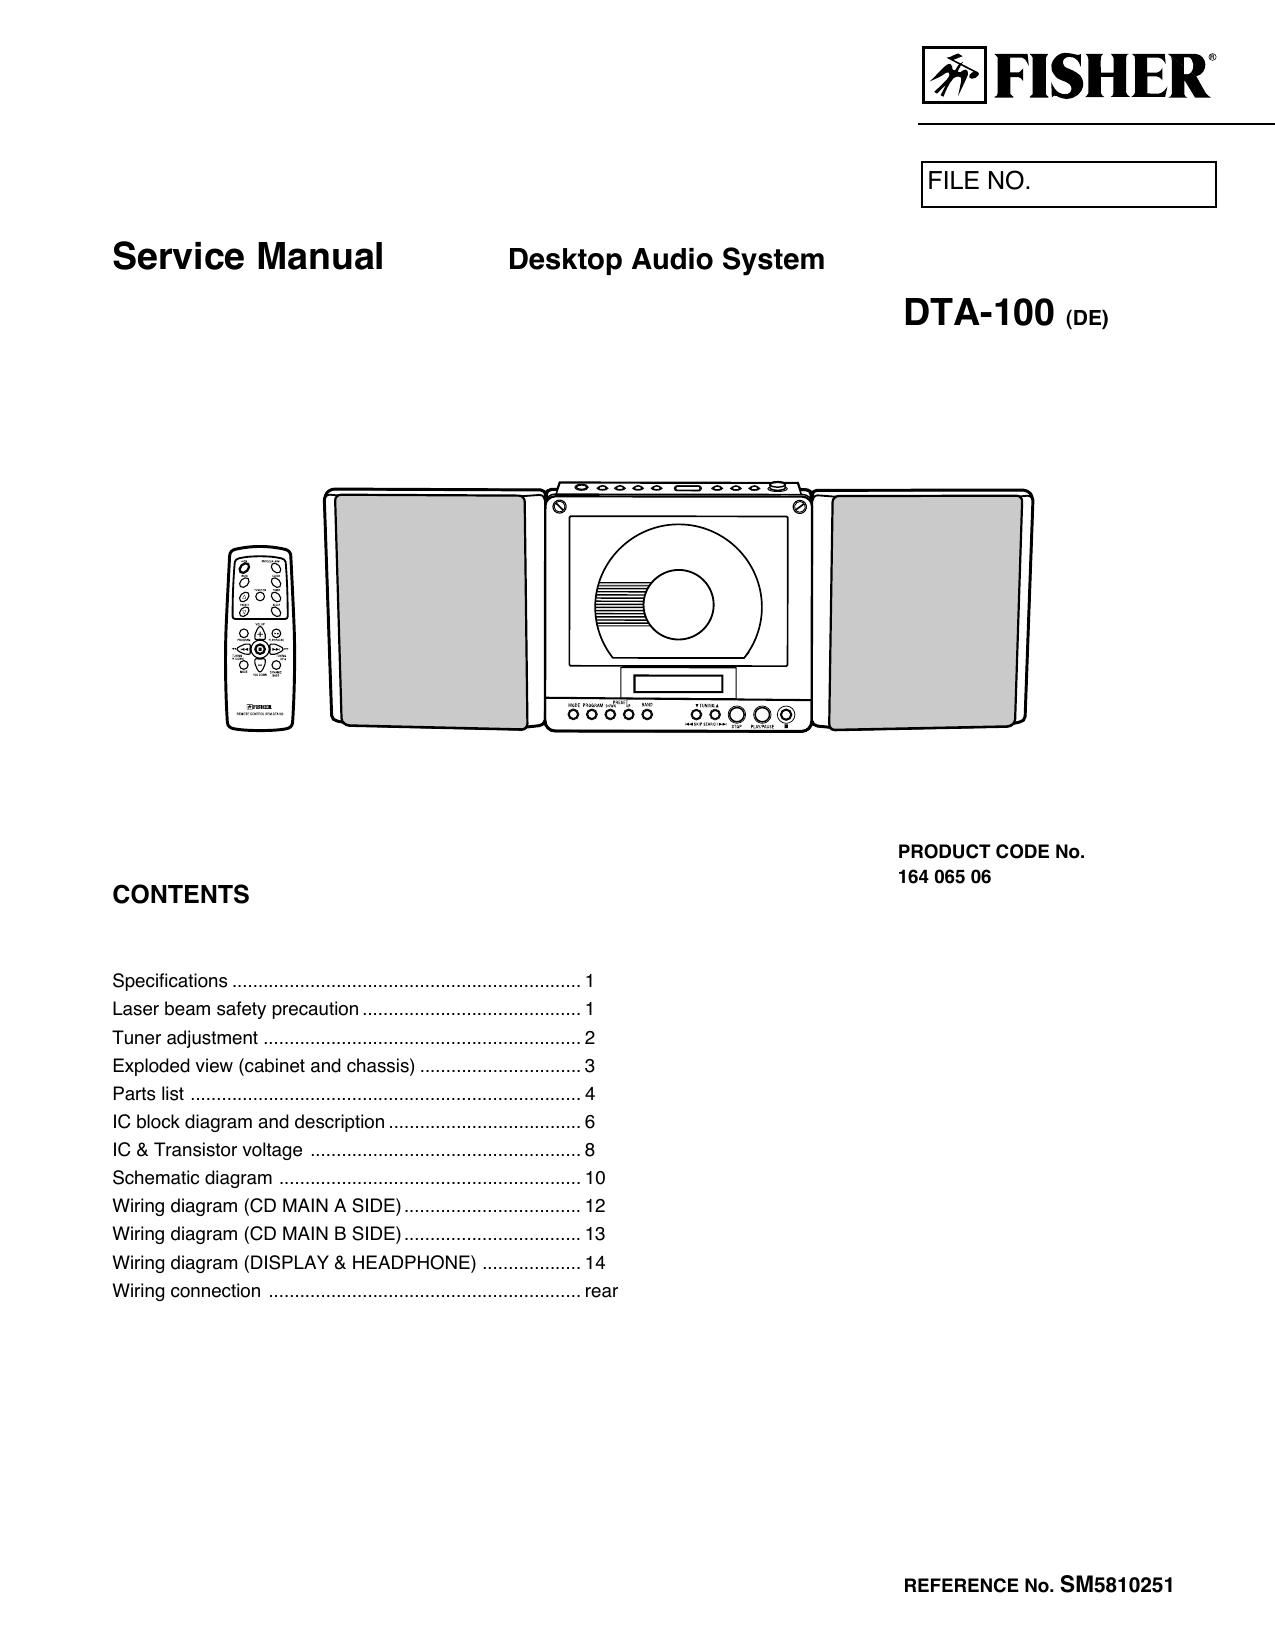 Fisher DTA 100 Service Manual